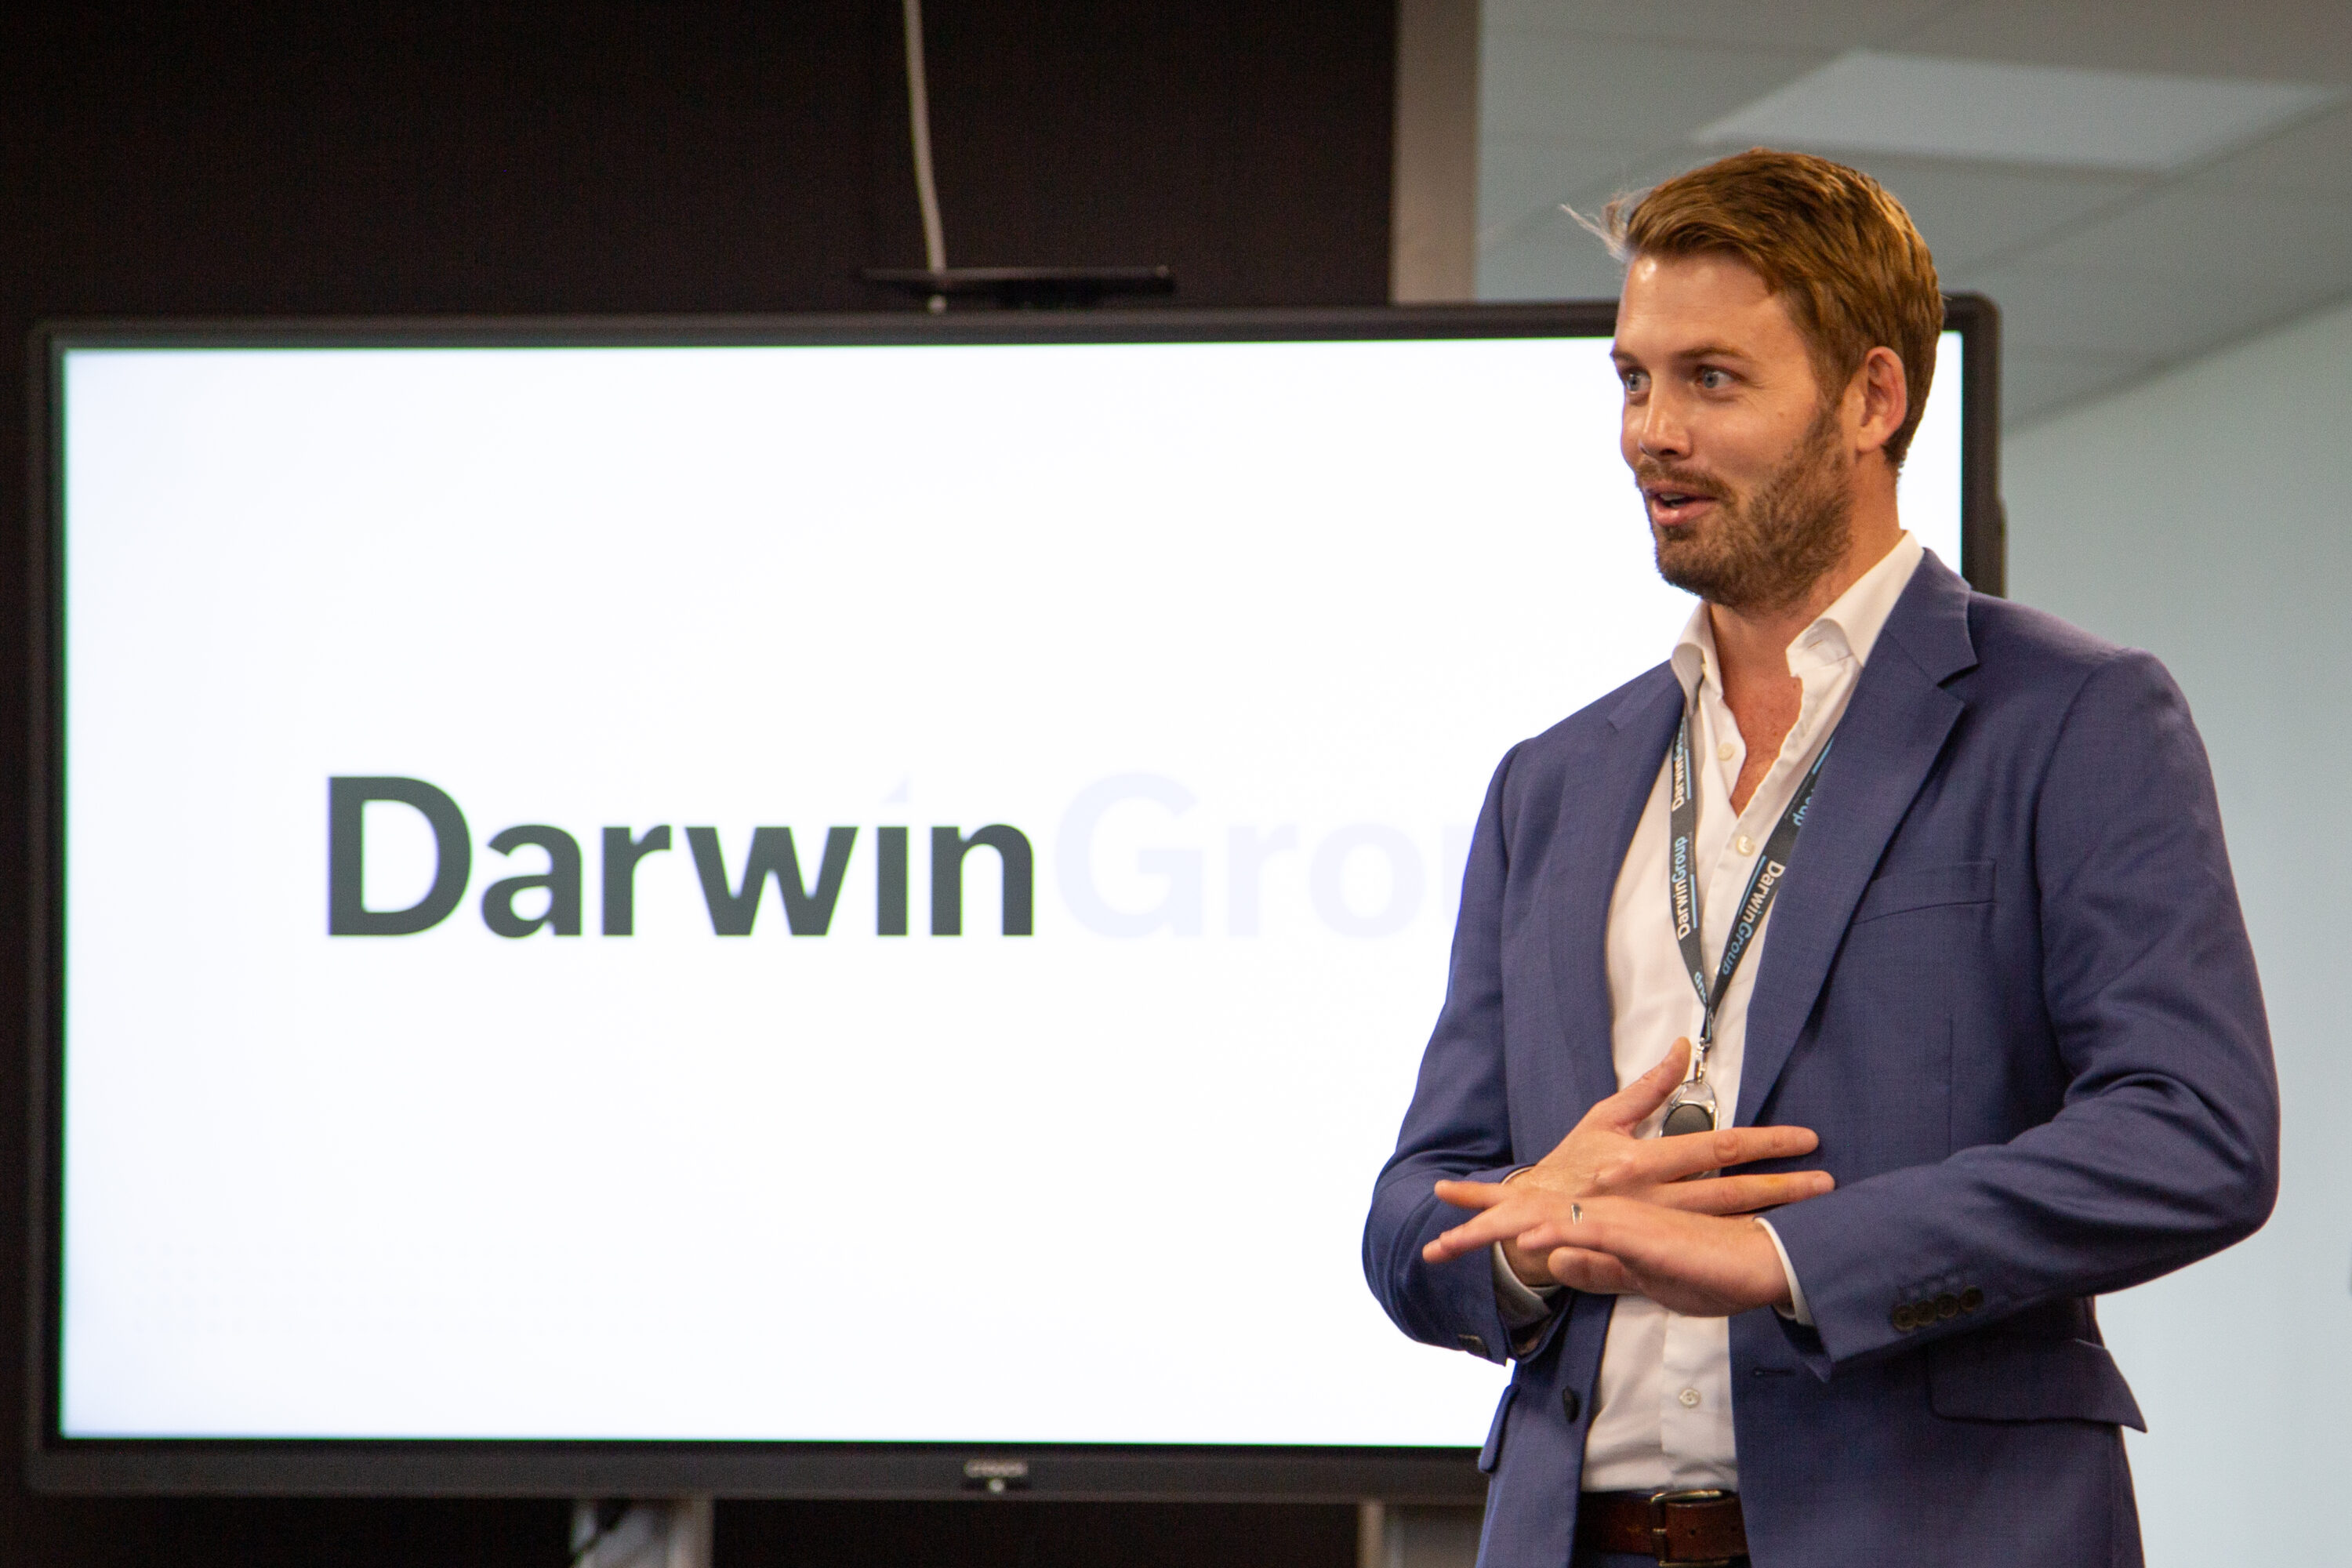 The Darwin Group CEO, Richard Pierce, stood in front of a large display screen, giving a presentation.